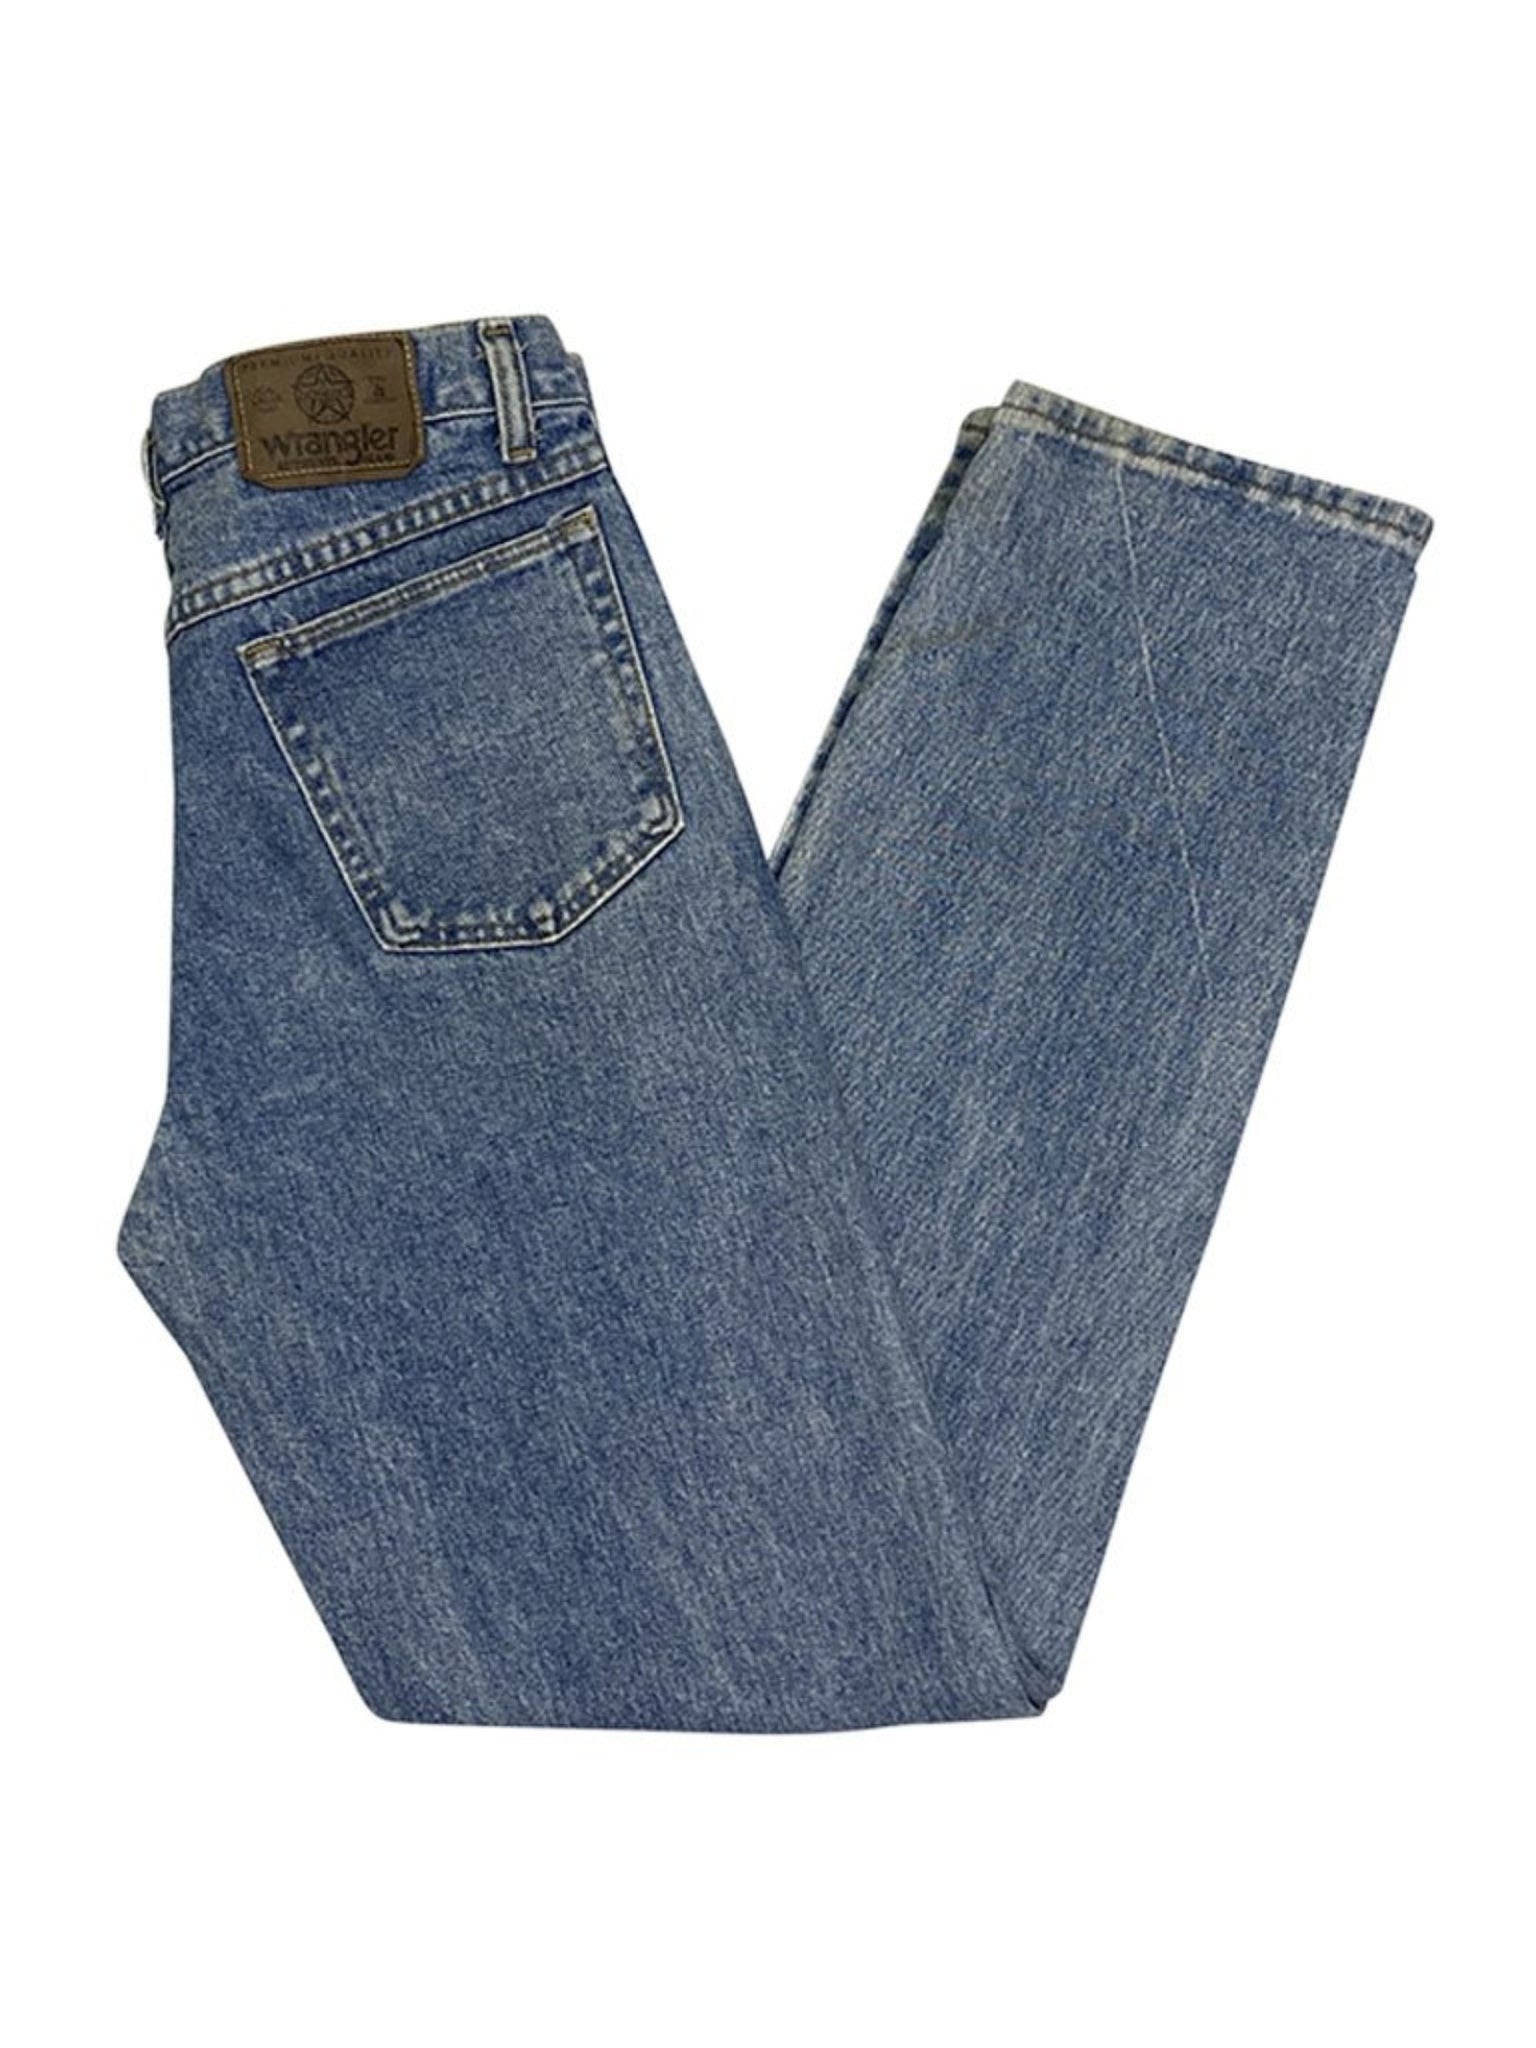 Wholesale designer jeans patch For A Pull-On Classic Look 